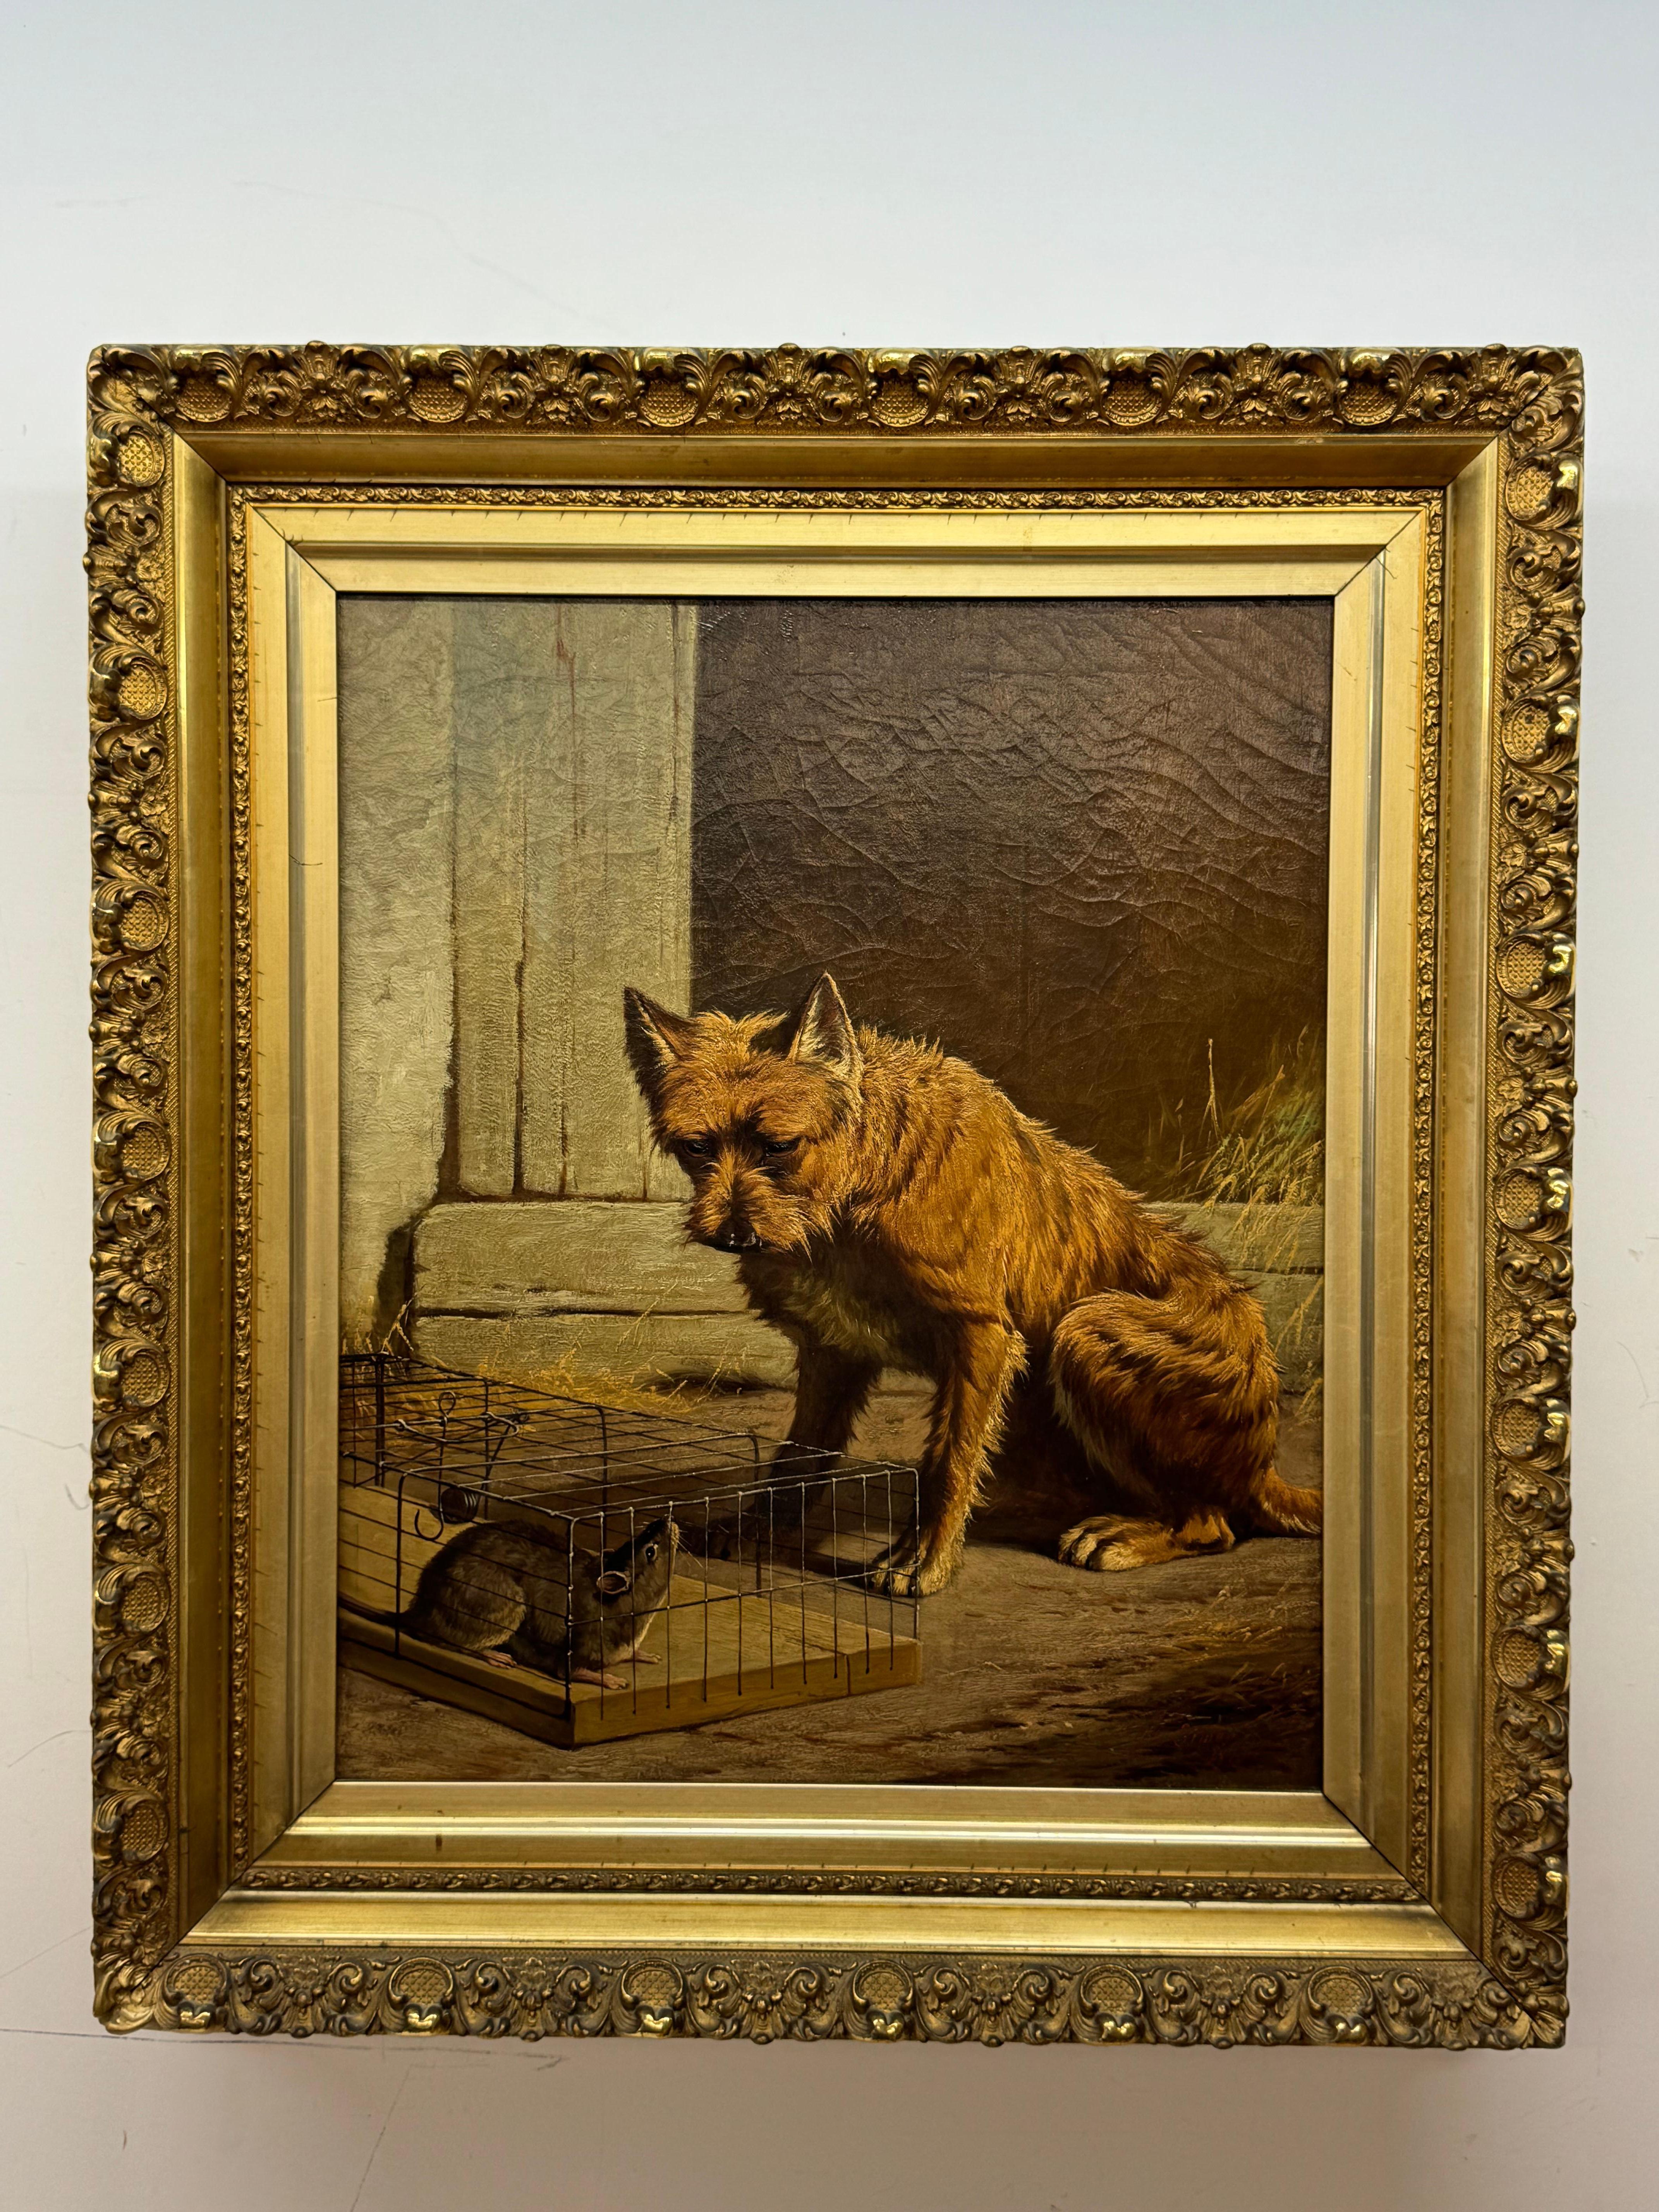 H. Simon 1879, Two Friends, Terrier with Rat Trapped

Oil on canvas

Gilded frame

20 x 24 unframed, 27 x 31 framed